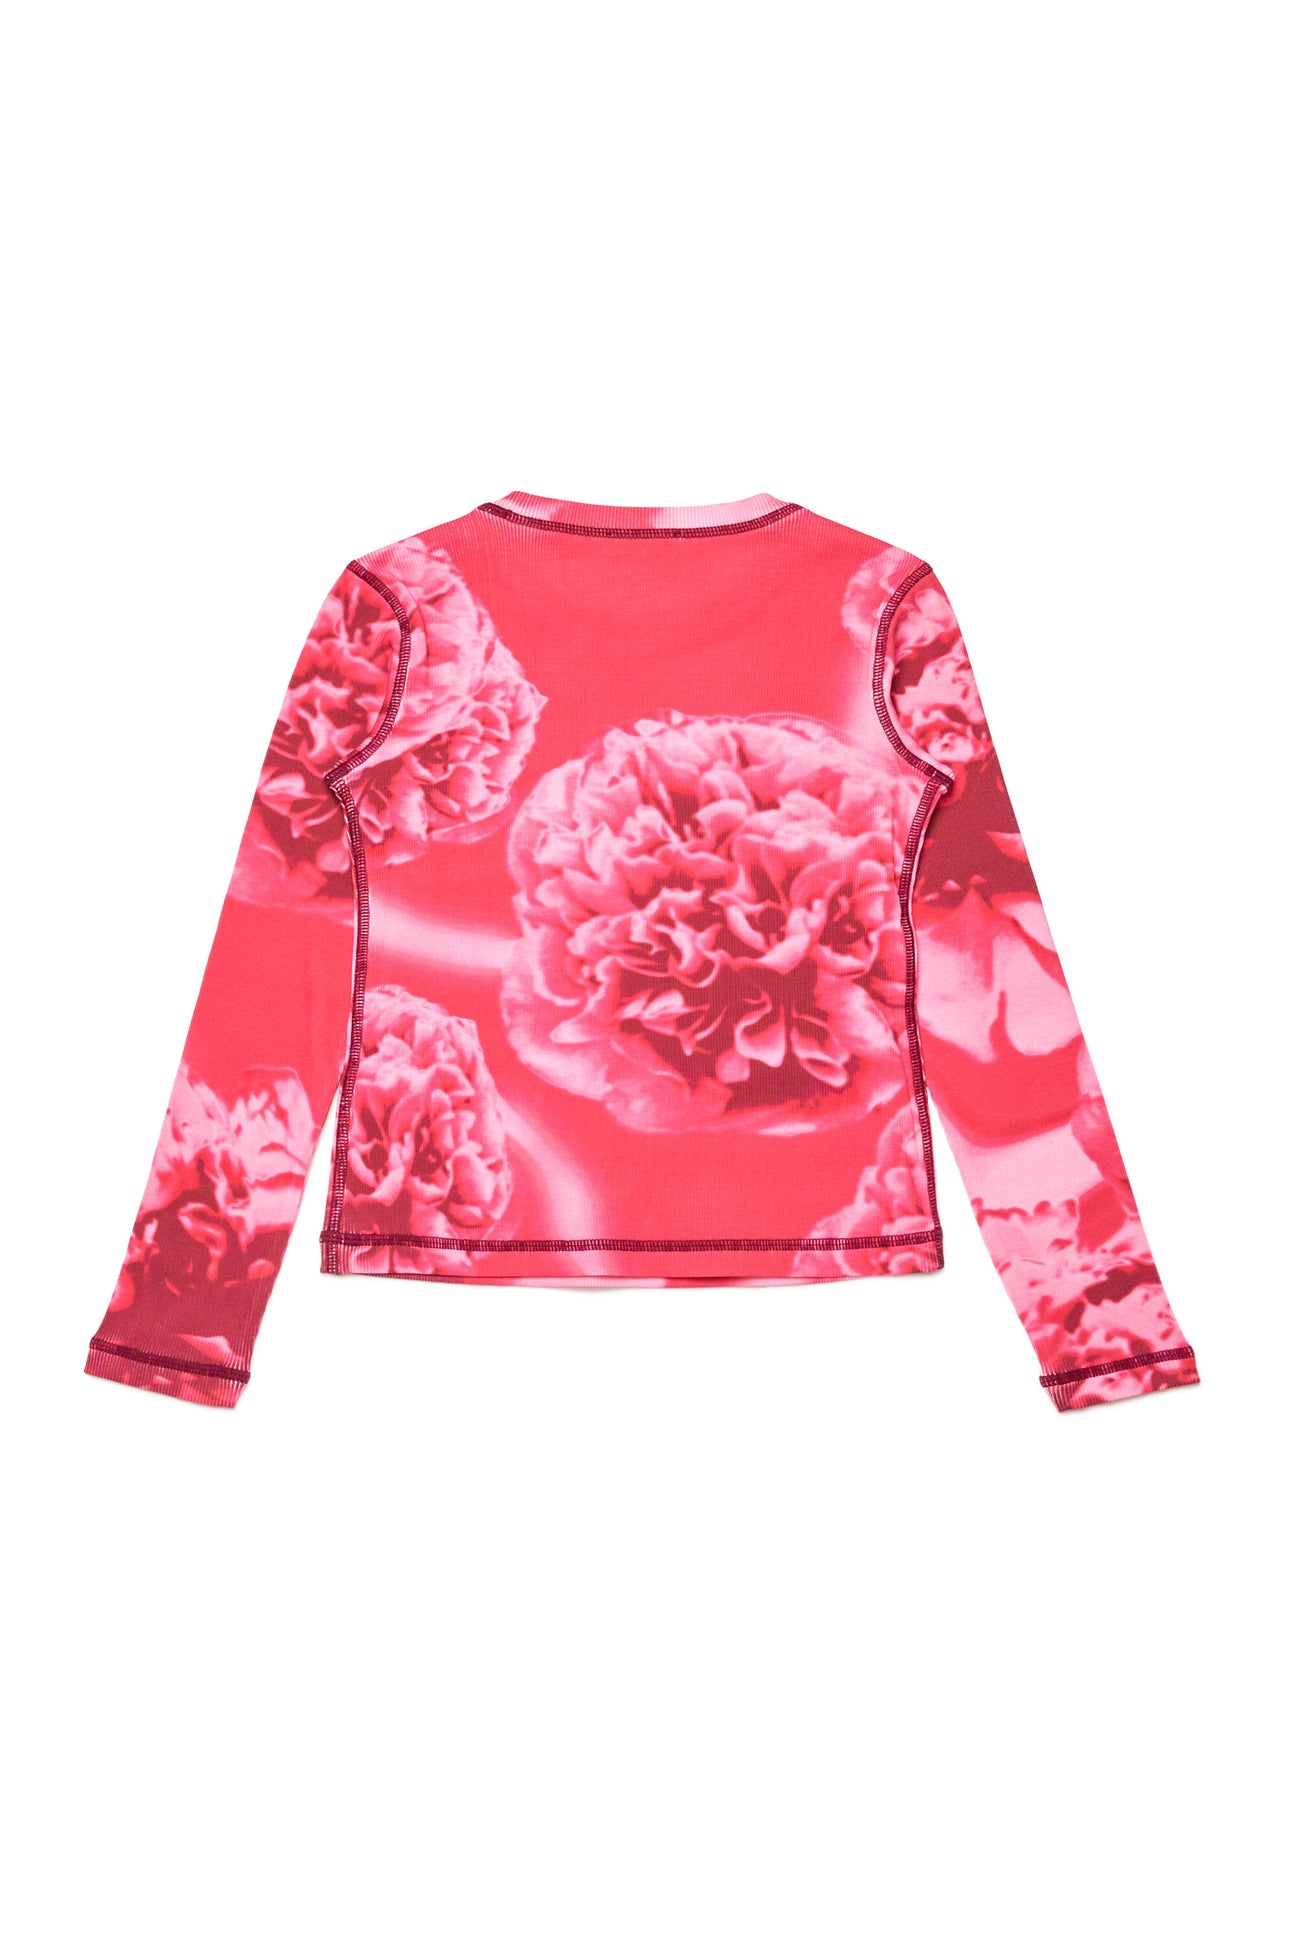 All-over floral long-sleeved T-shirt All-over floral long-sleeved T-shirt